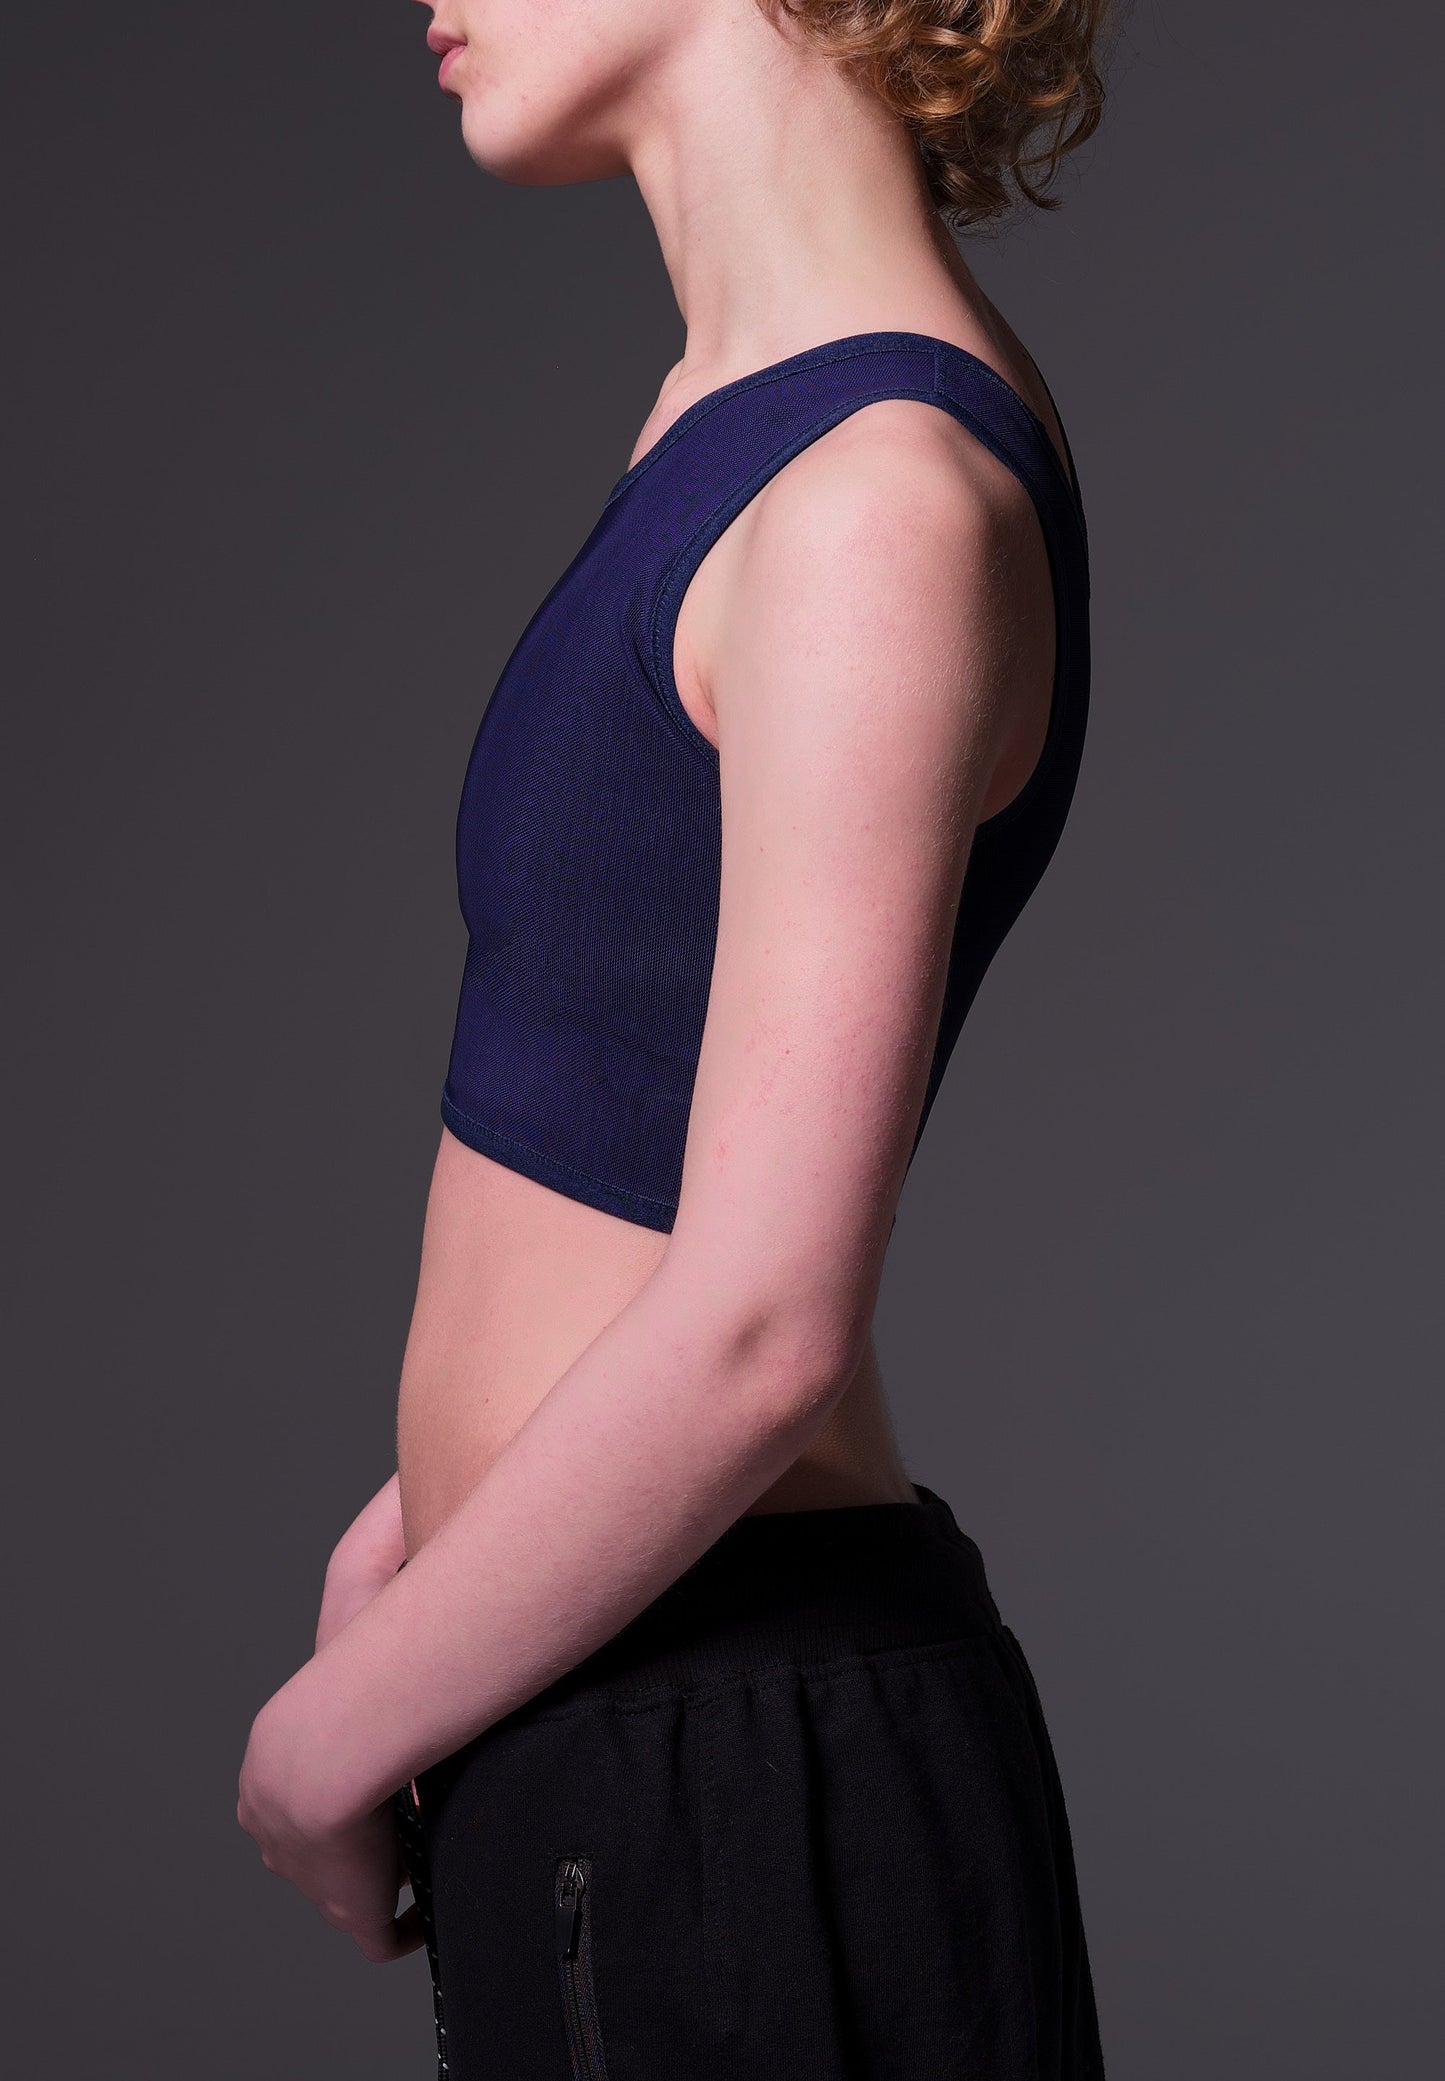 Lo wearing the Basic Swim Binder dark blue, close-up from the side